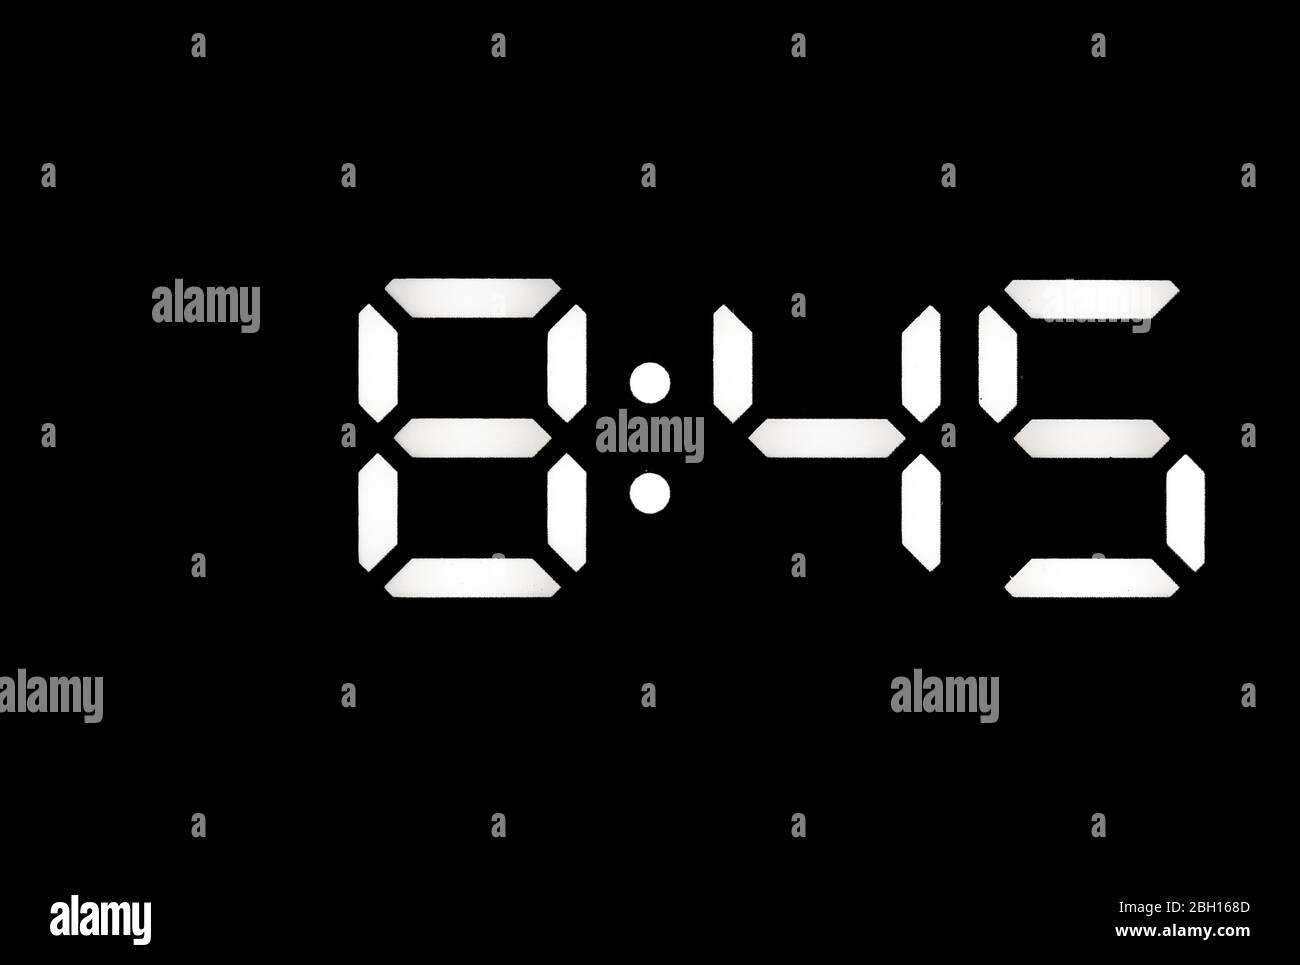 Real white led digital clock on a black background showing time 8:45 Stock Photo